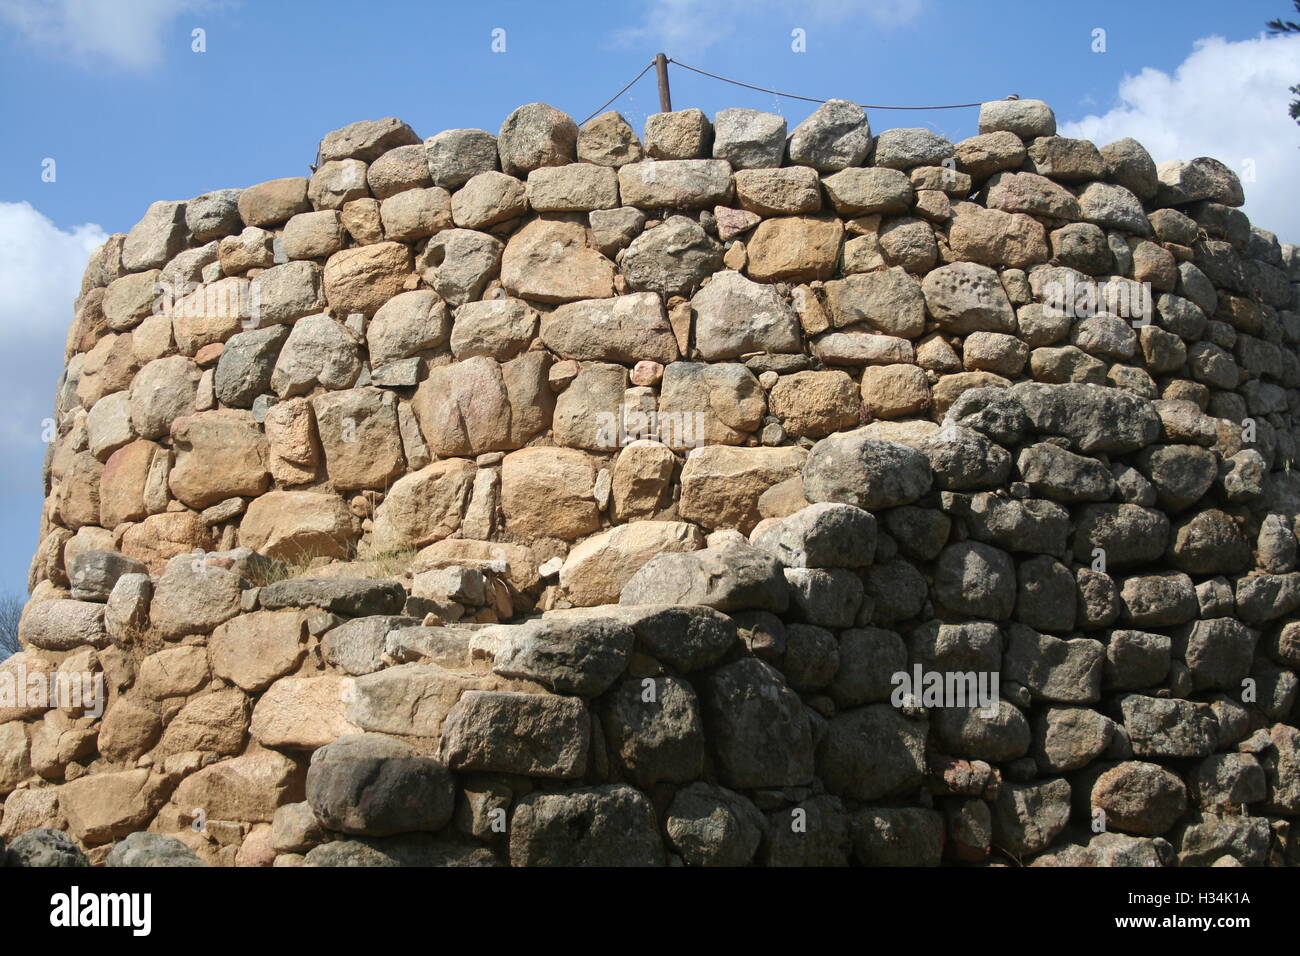 A stone turret at an old castle in Sardinia, Italy Stock Photo